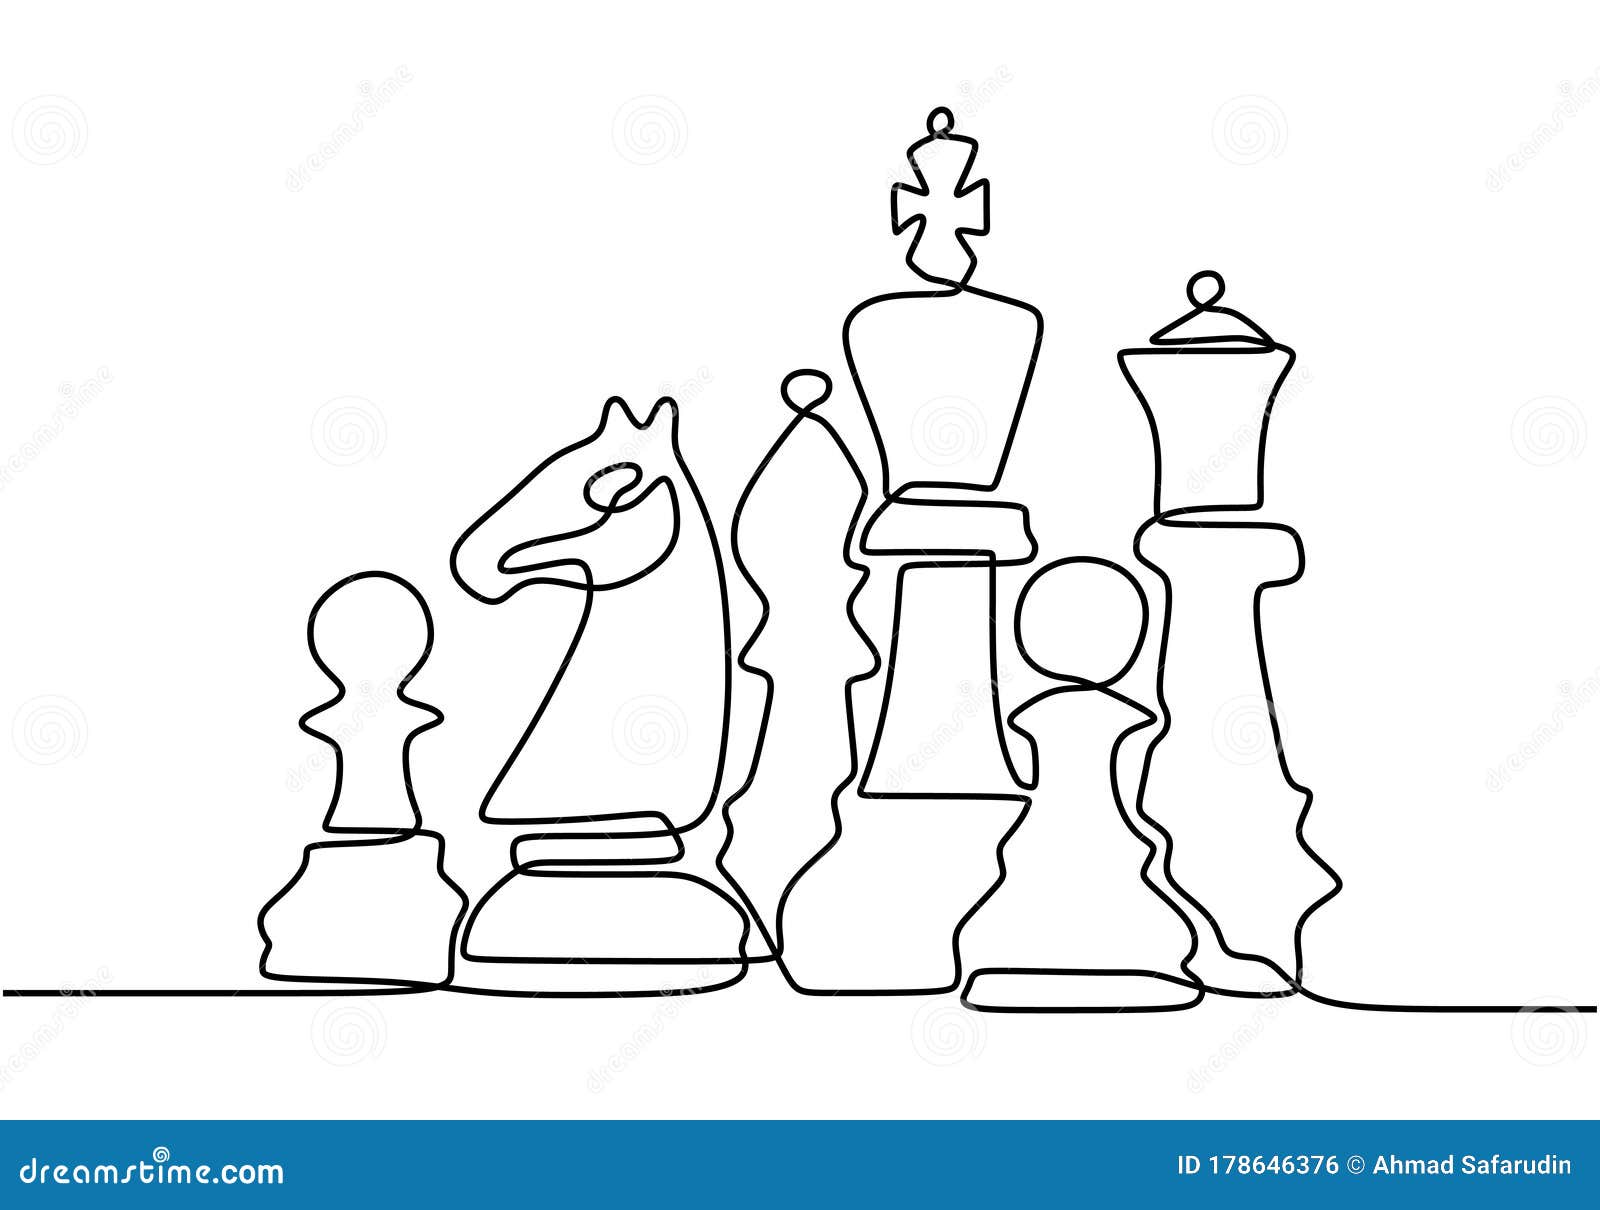 Compass Leaning Against Chess Piece With Other Chess Pieces In